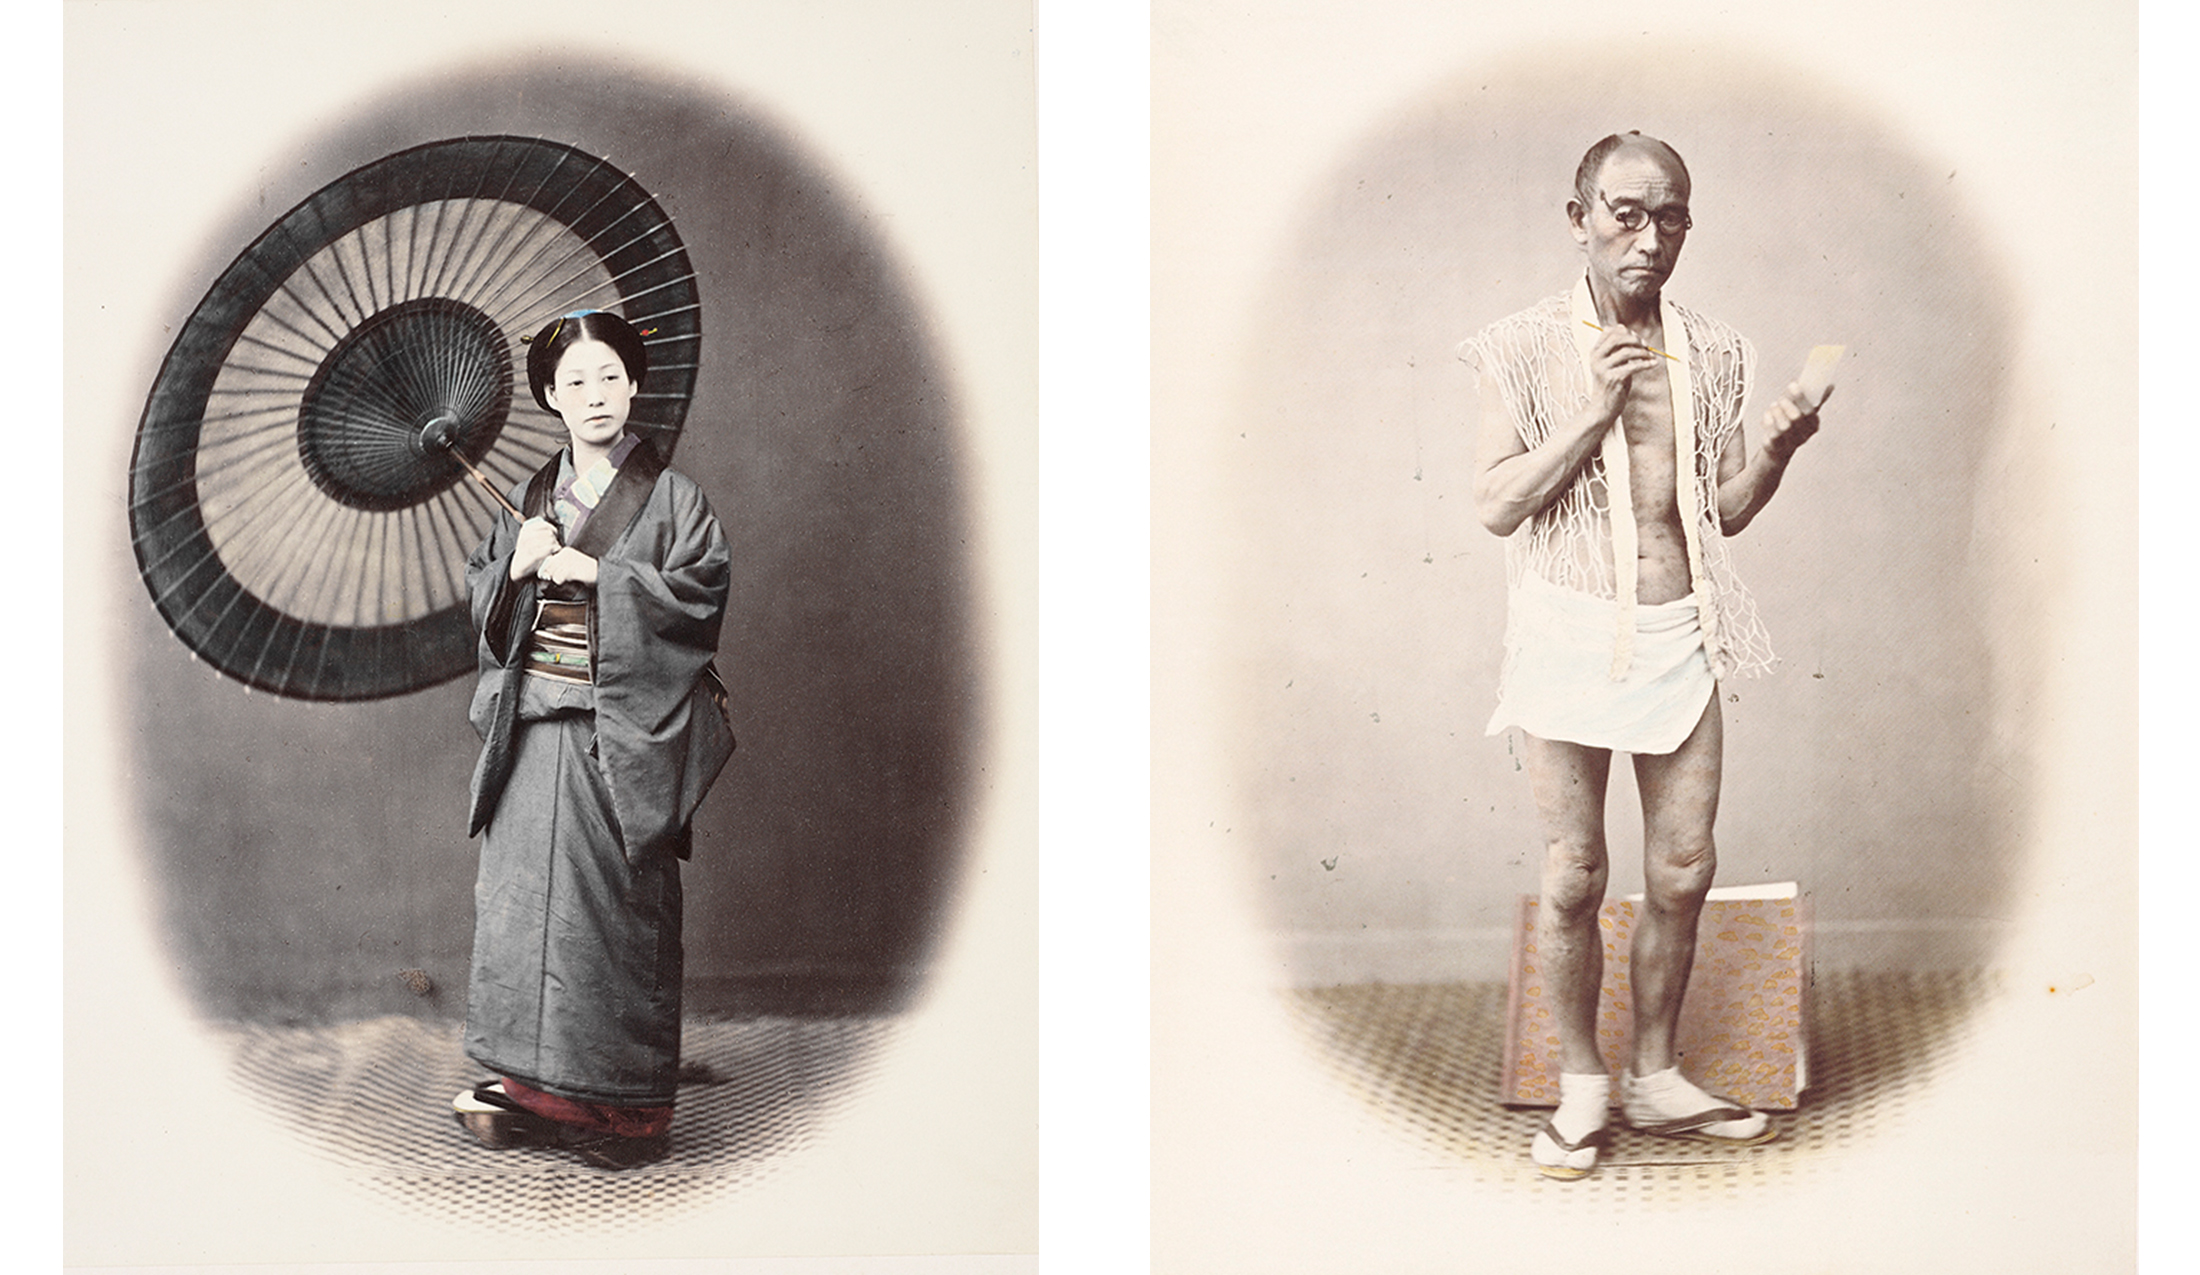 left: young Asian woman dressed in kimono and holding parasol. right: Older Japanese man standing wearing a loincloth and a open netted vest and holding a photograph in one hand and a small paintbrush or pen in the other; On the ground behind him his portfolio is placed